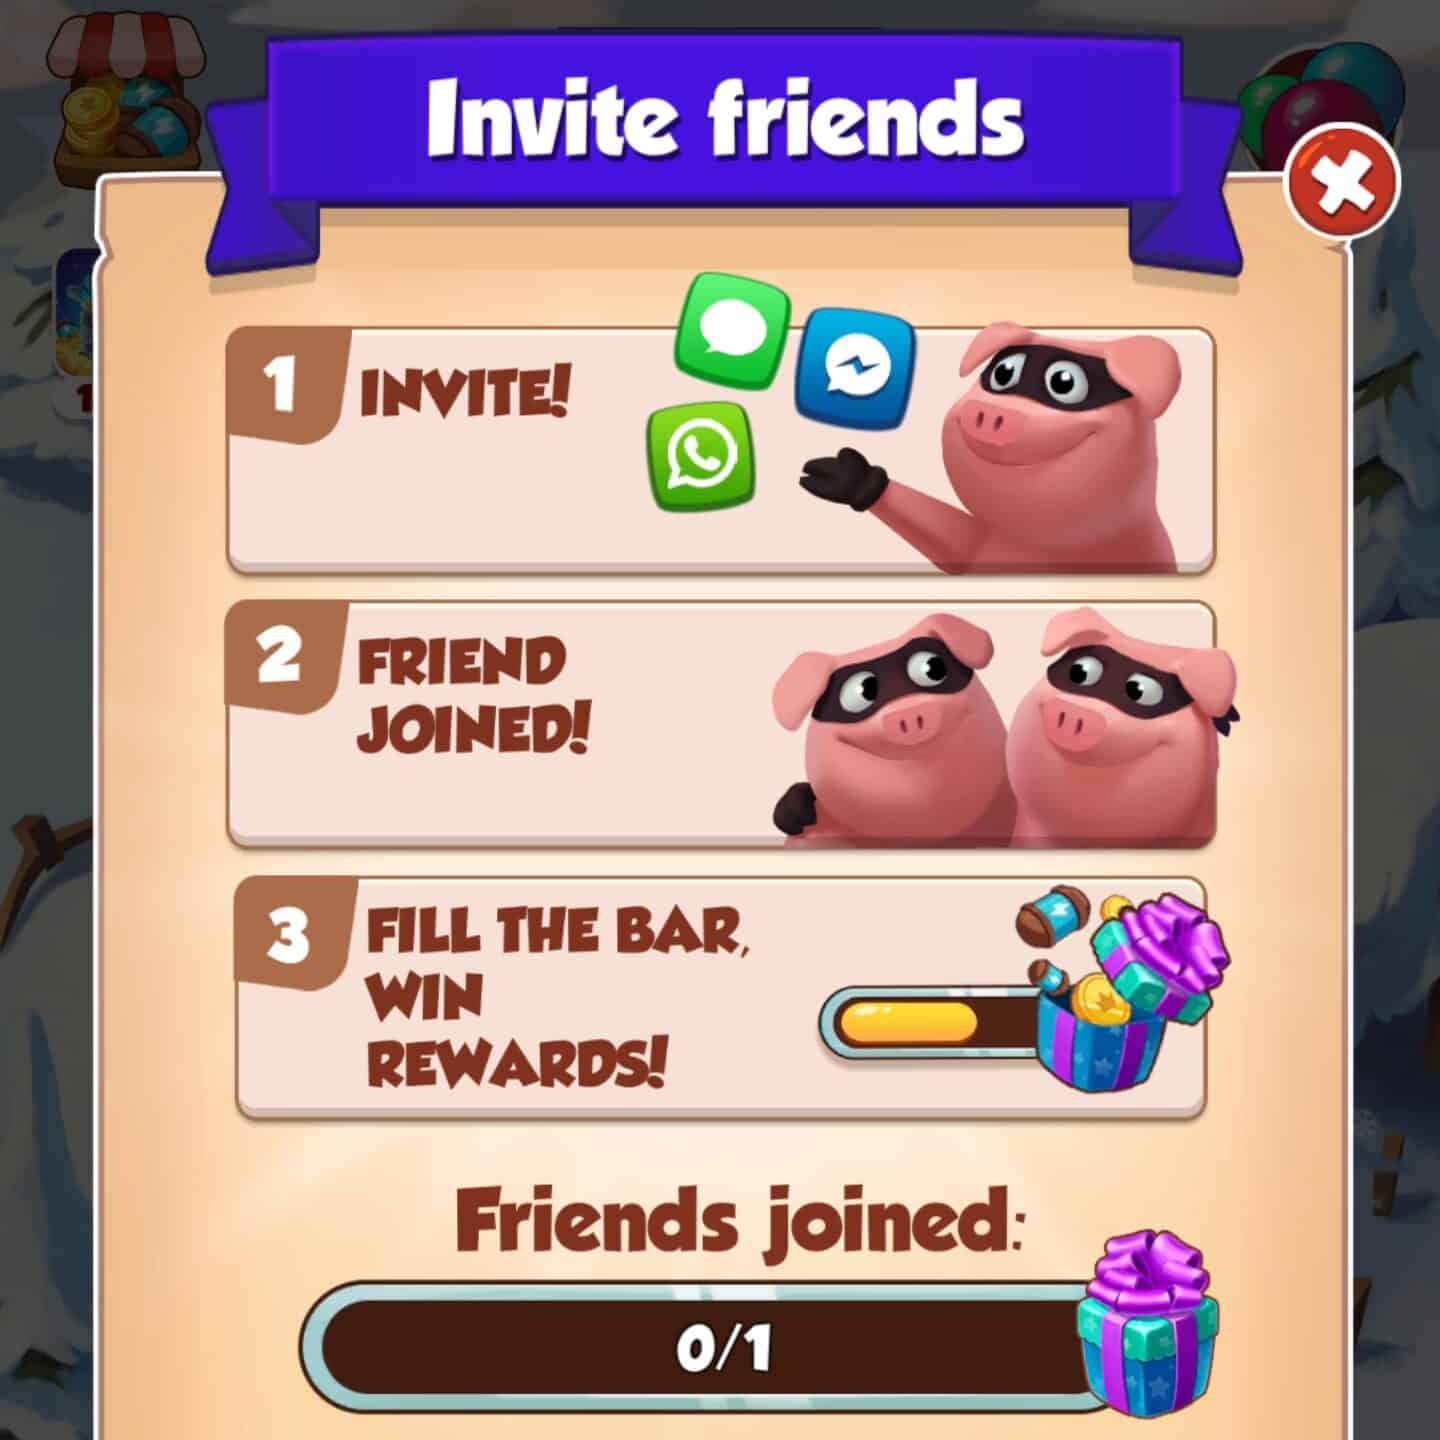 Inviting friends will give you various rewards